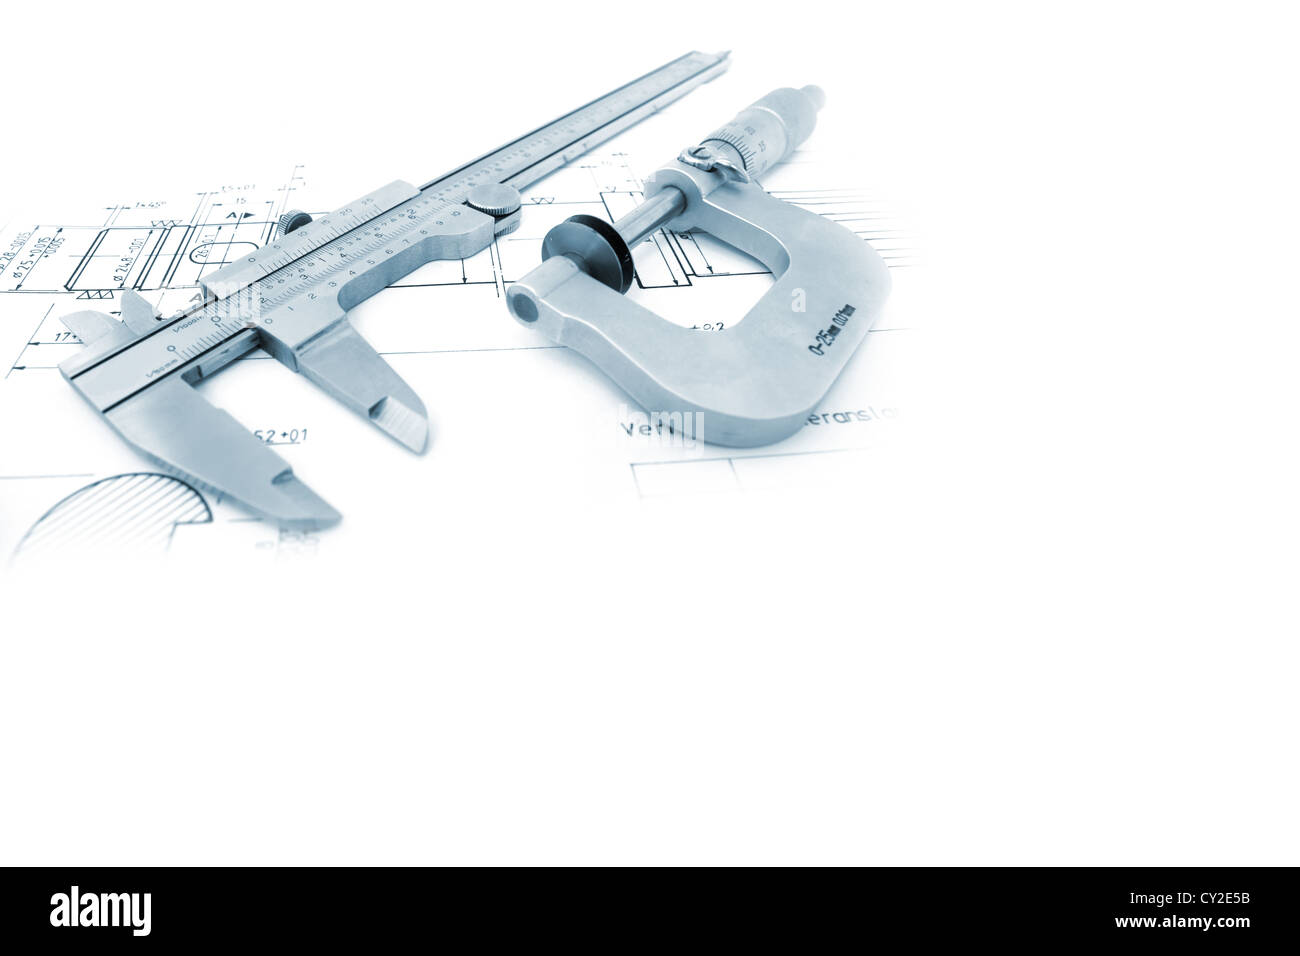 Caliper and Micrometer on blueprint horizontal close up with copyspace. Shallow depth of field Stock Photo